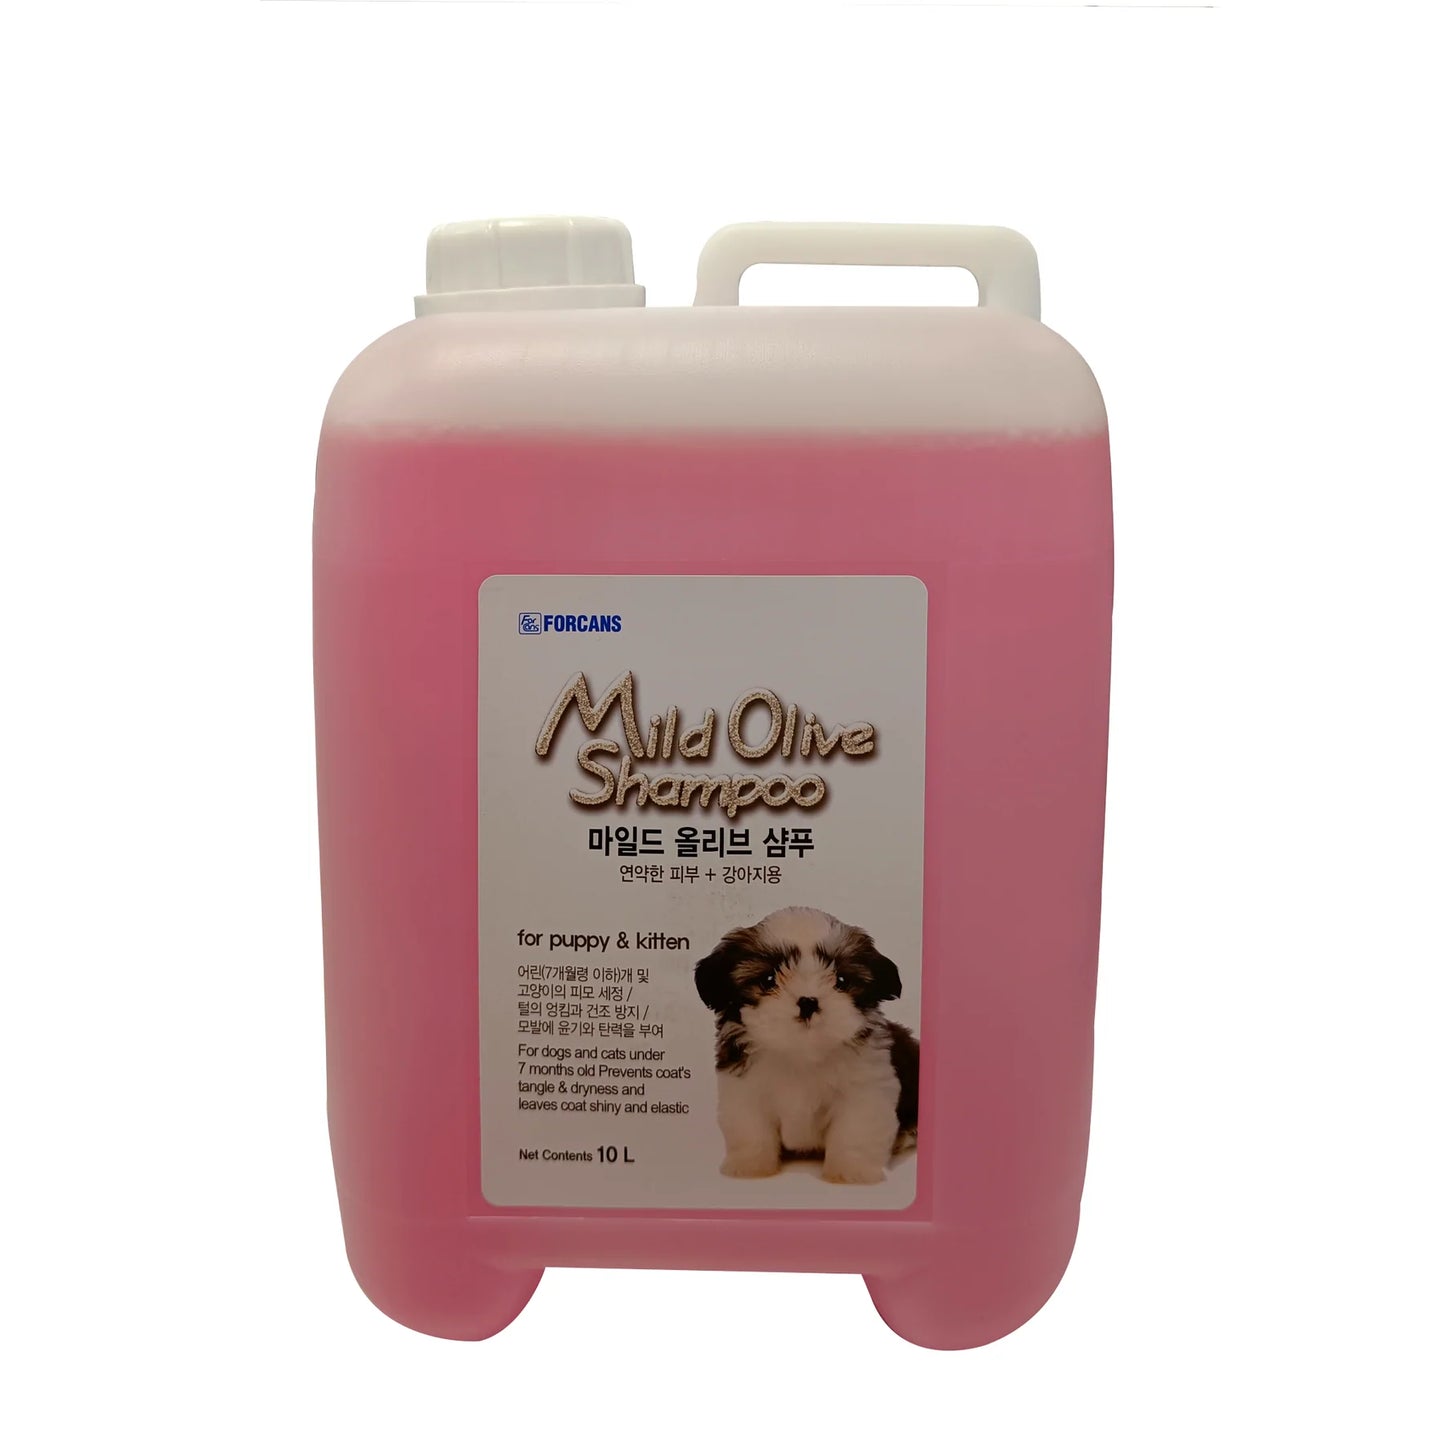 Forbis Mild Olive Shampoo for Puppies & Kittens 10litre